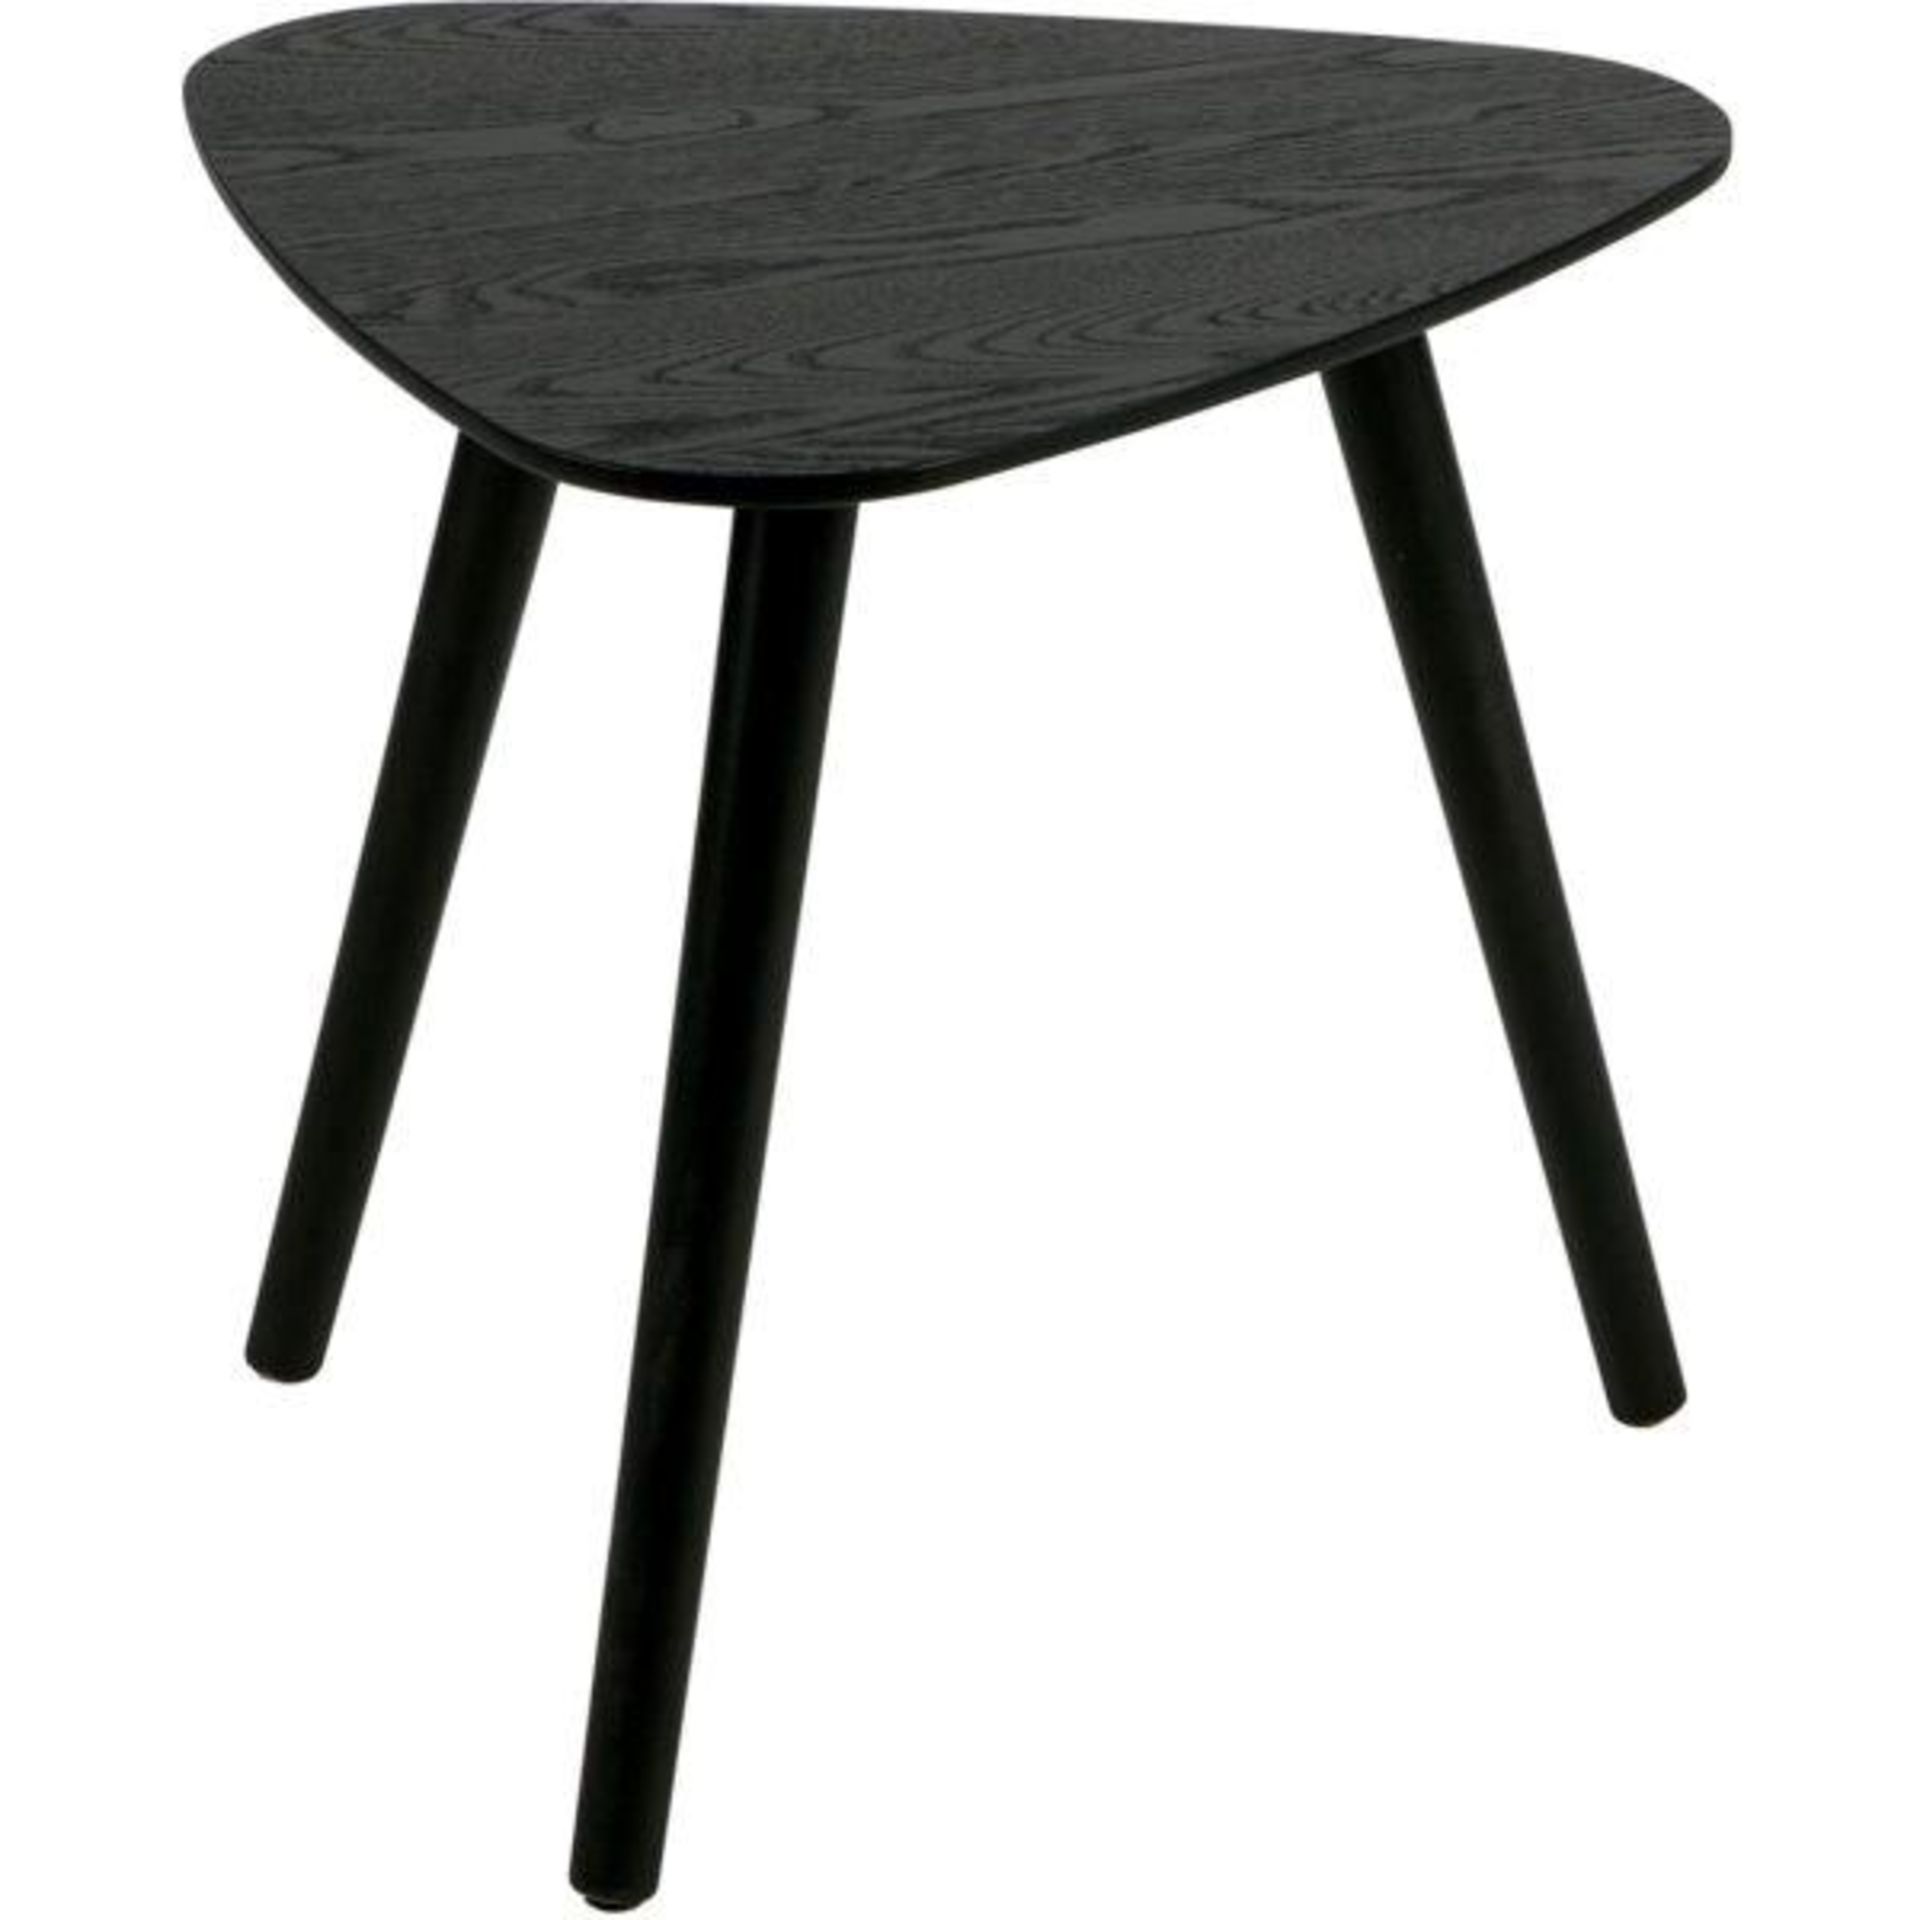 Set Of 2 x NILA Contemporary Wooden Side Tables In BLACK - Made By Woood - Brand New Boxed Stock - C - Image 2 of 6